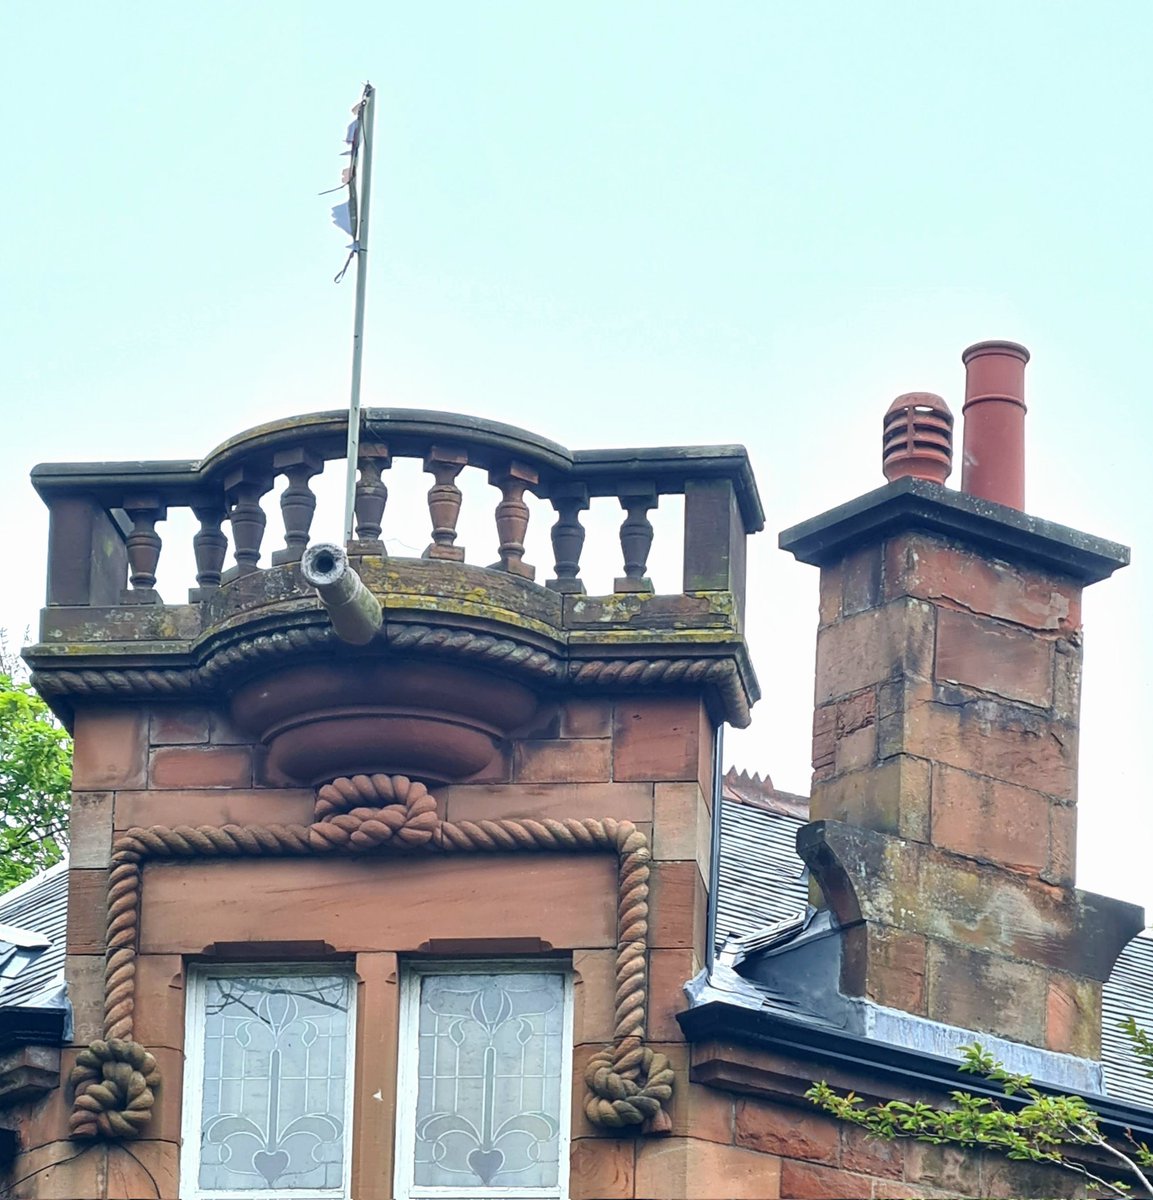 I love the architectural decoration above the window of this villa in the Dumbreck area of Glasgow, especially the stone cannon!

#glasgow #architecture #glasgowbuildings #window #dumbreck #architecturaldetails #designdetail #architecturalphotography